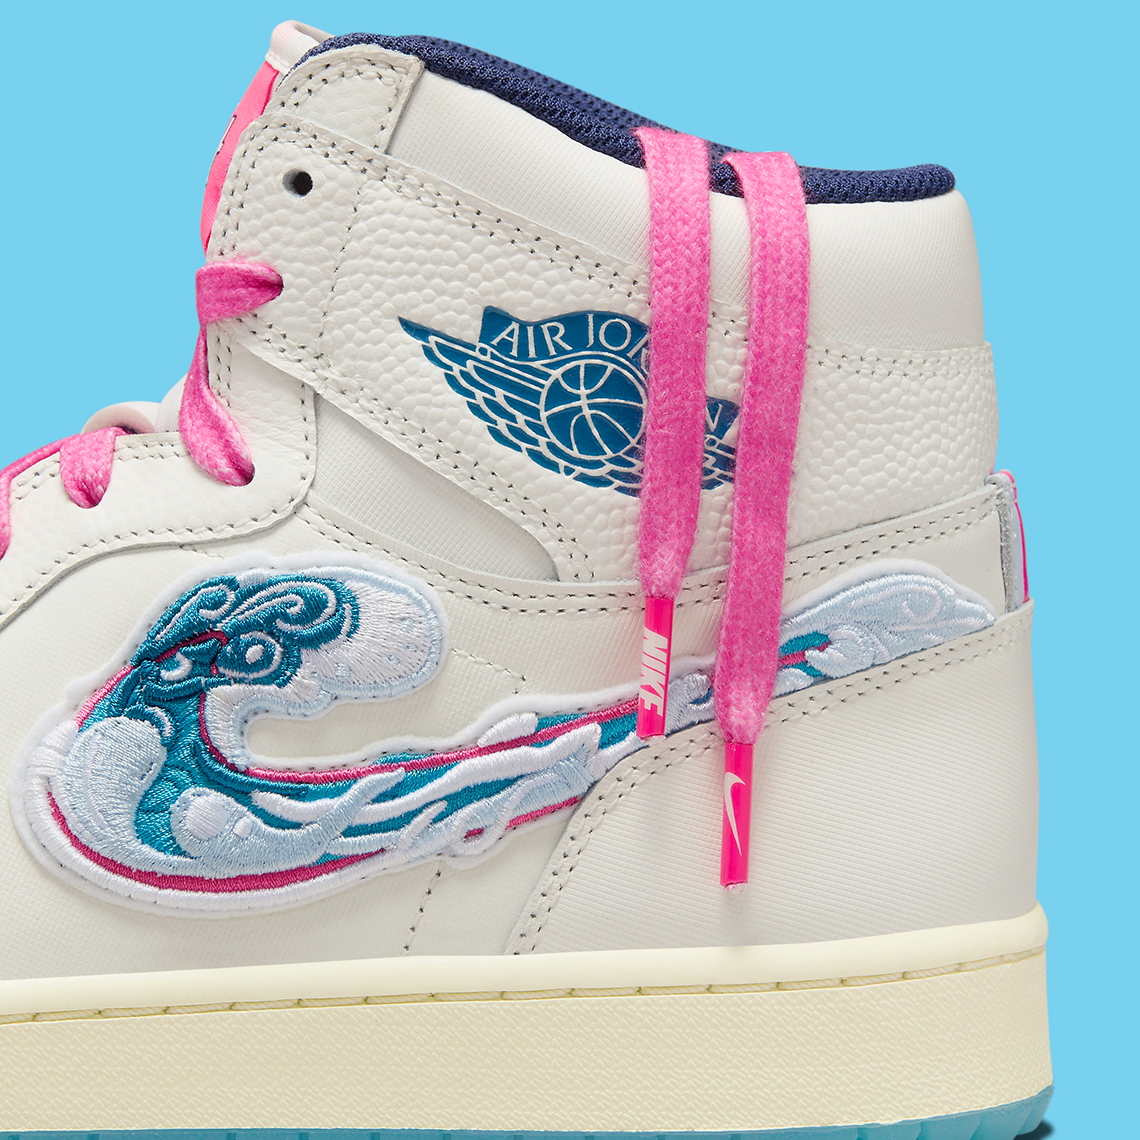 Michelle Wie russell westbrook sports air jordan 1 chicago for true religion Golf Aloha Fv3565 100 11